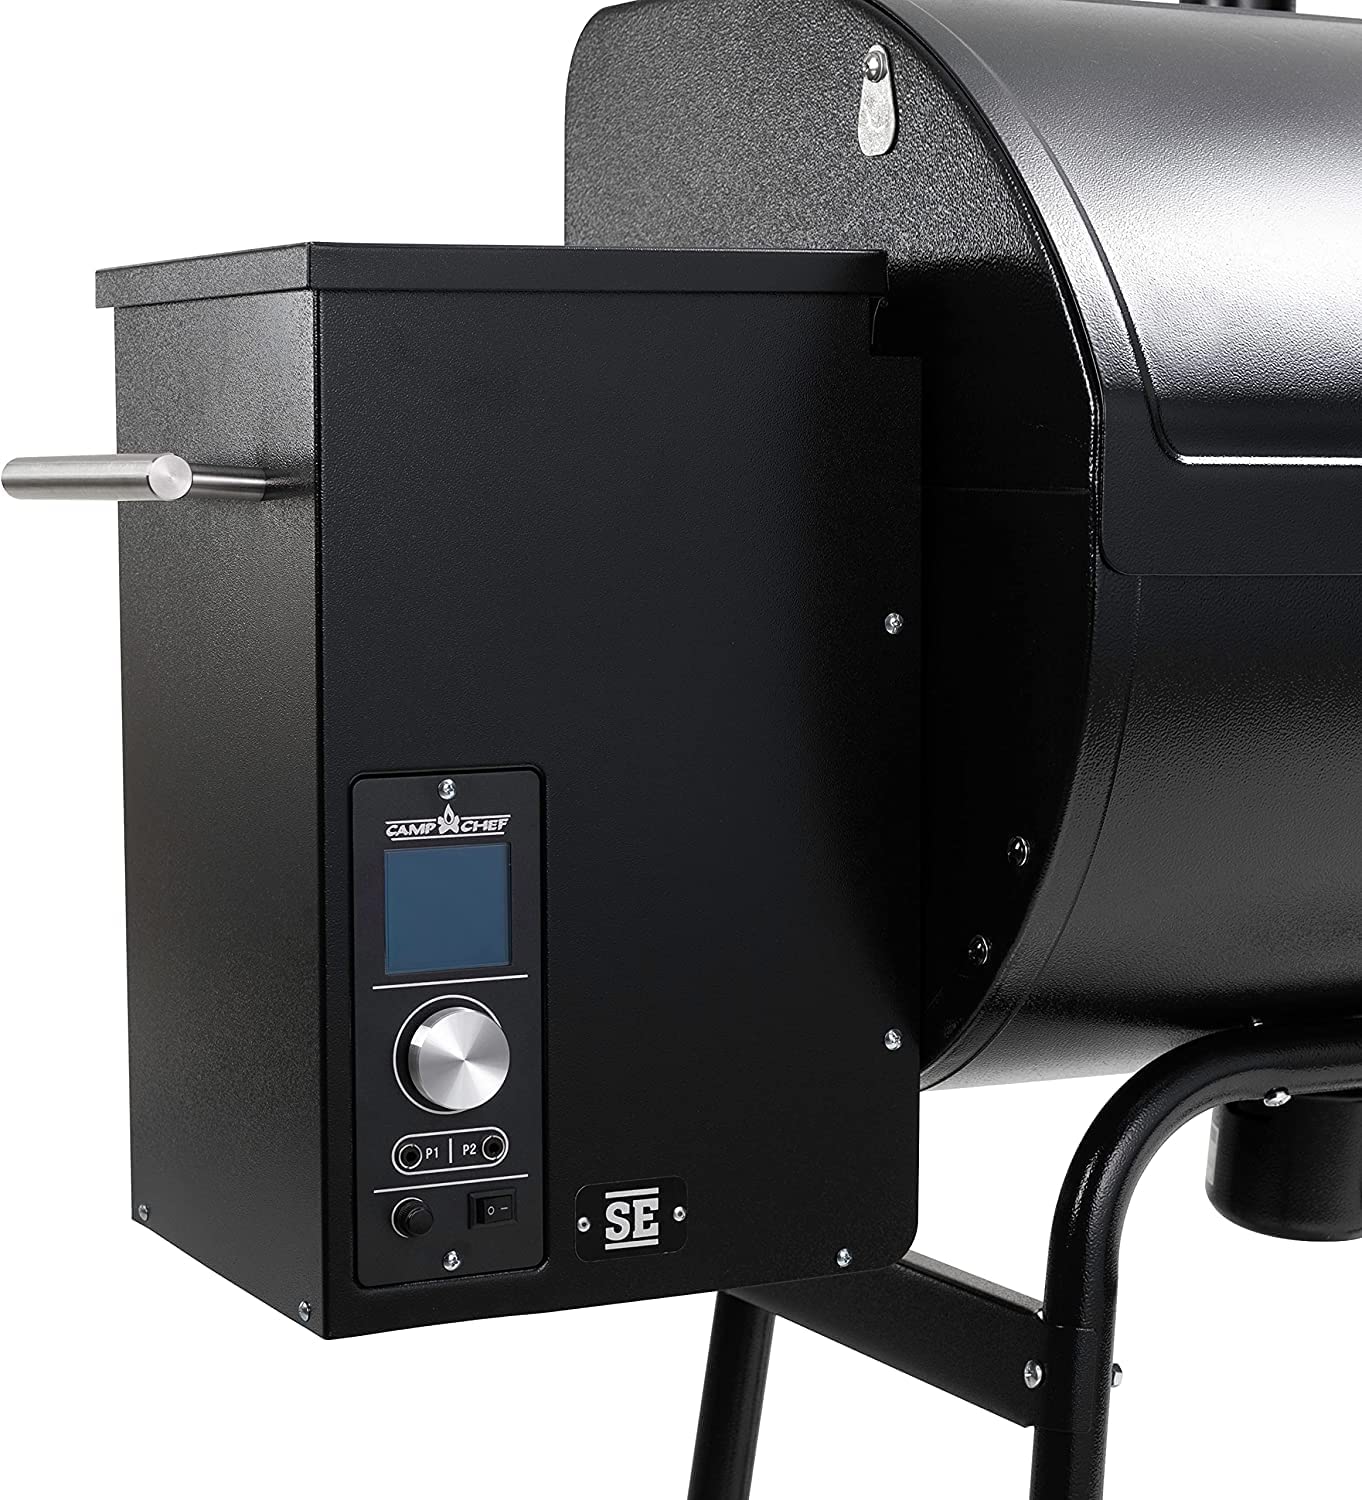 Camp Chef SmokePro SE Pellet Grill - image 4 of 8